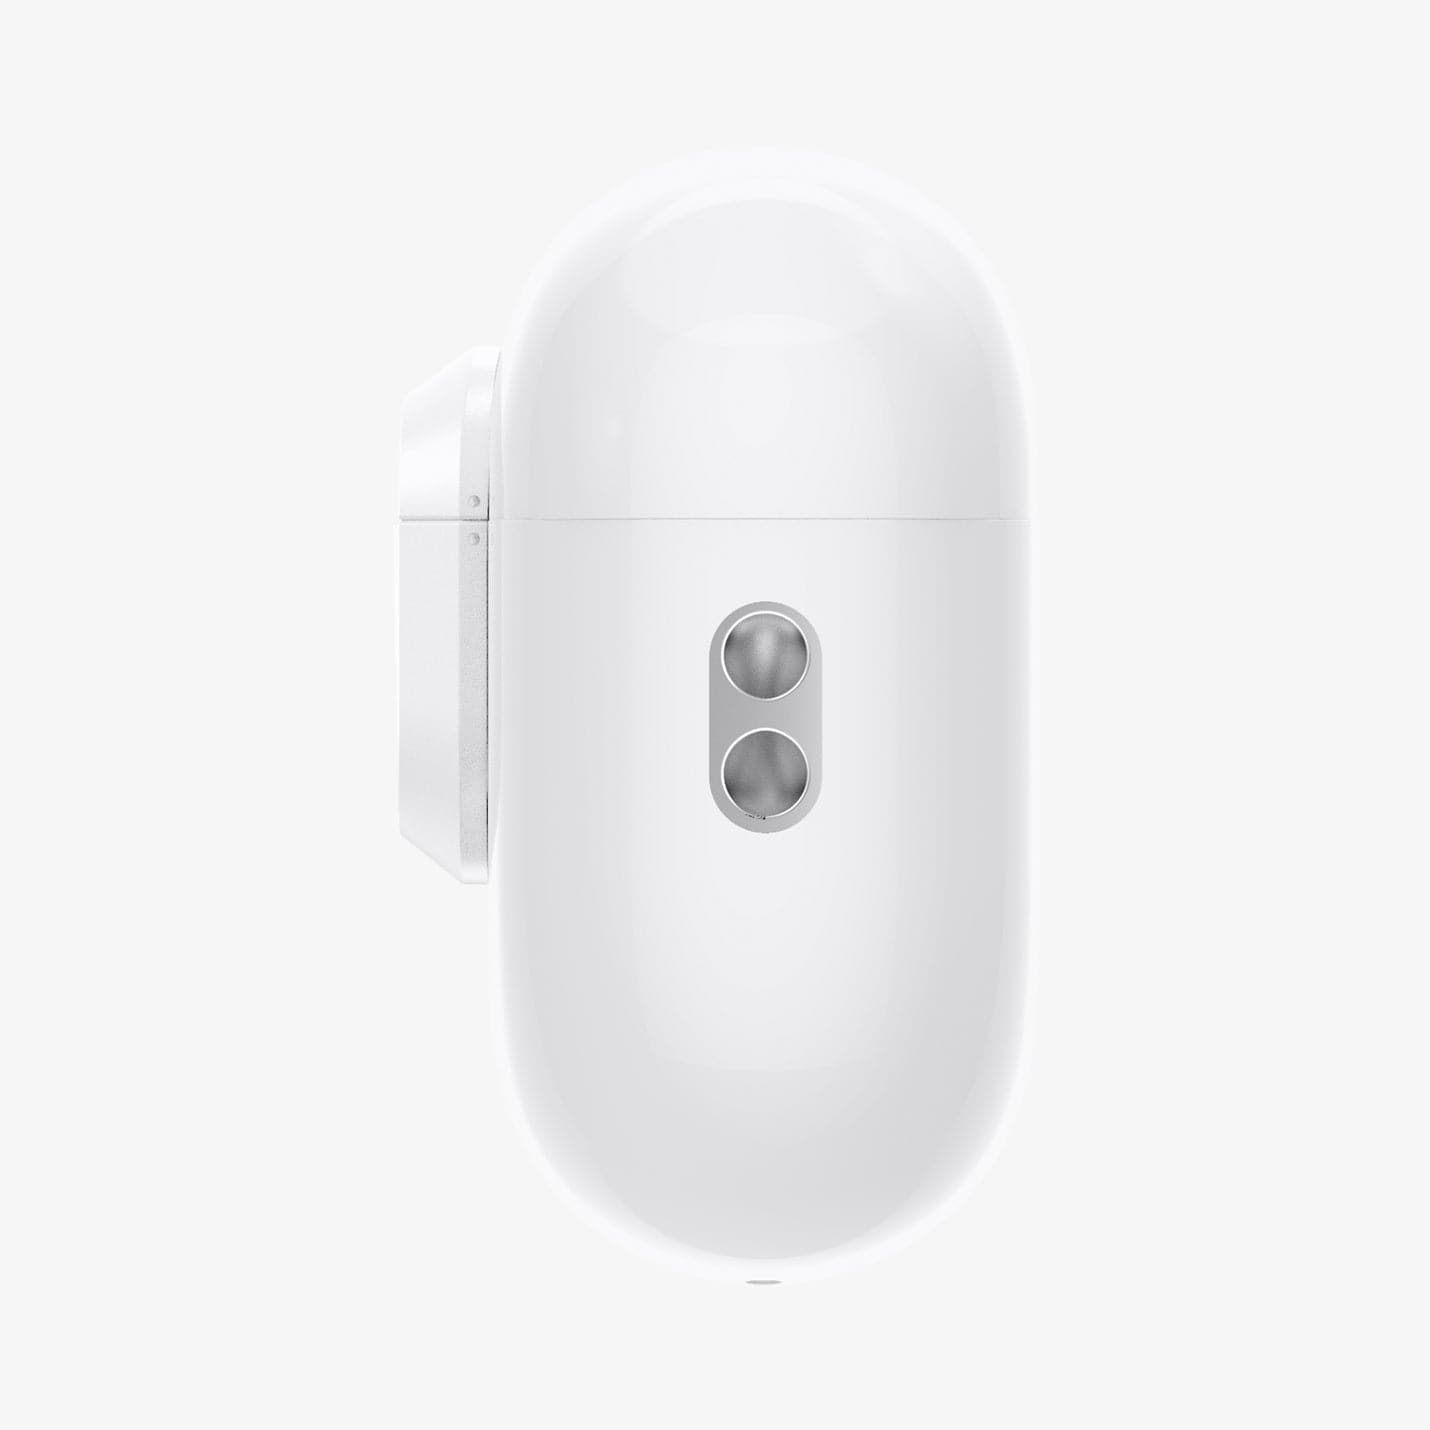 ASD06090 - Apple AirPods Pro / AirPods Pro 2 Case Lock Fit in white showing the side